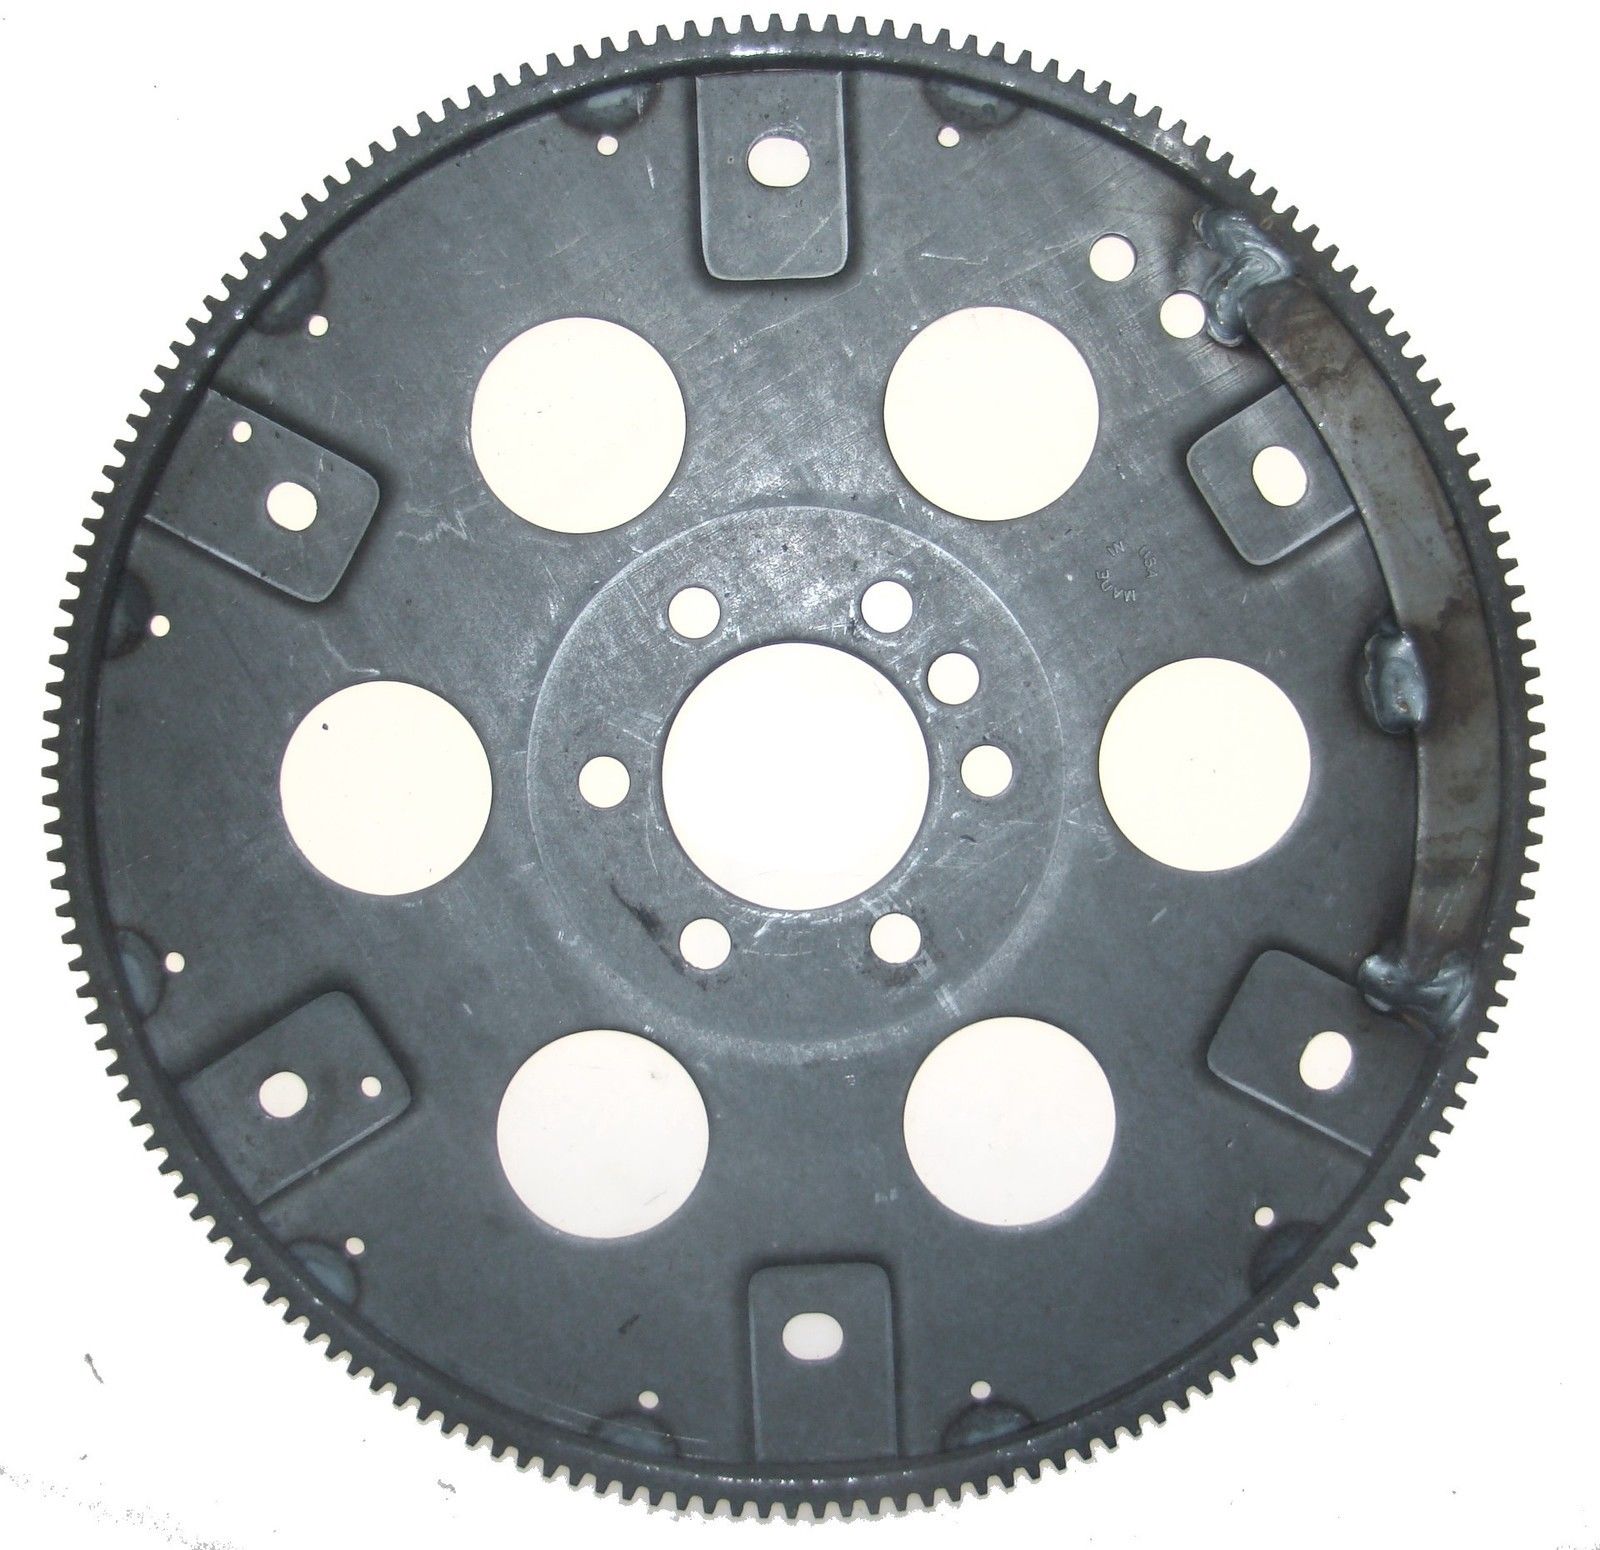 PCE229.1019 compatible with Chevy SBC 350 Late 1Pc Rms 168 Int/Ext Billet Steel Light SFI Flywheel 